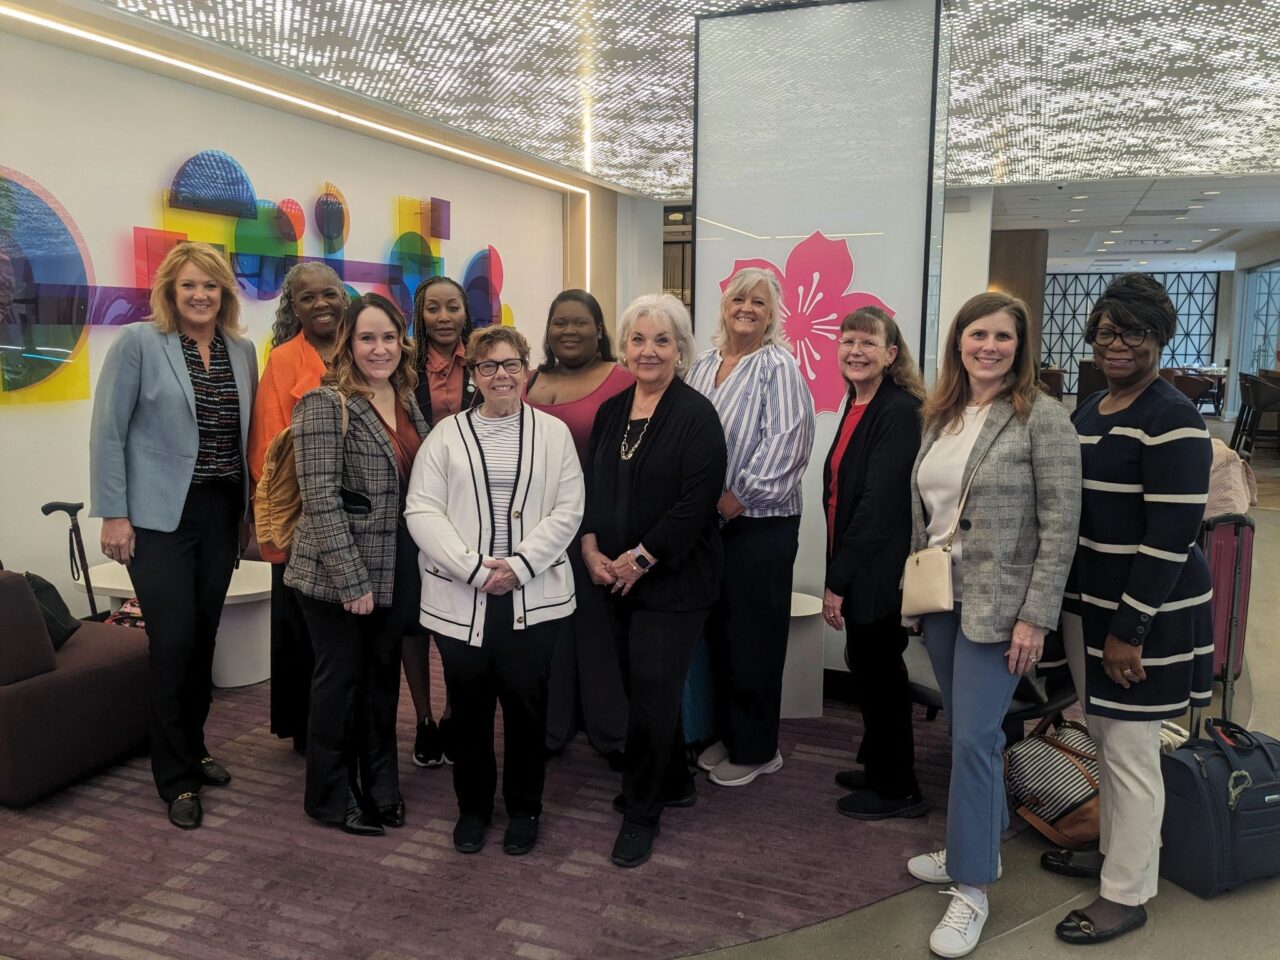 Lisa A. Lacasse: I got to represent American Cancer Society Cancer Action Network at the Patient Quality of Life Coalition Lobby Day in Washington